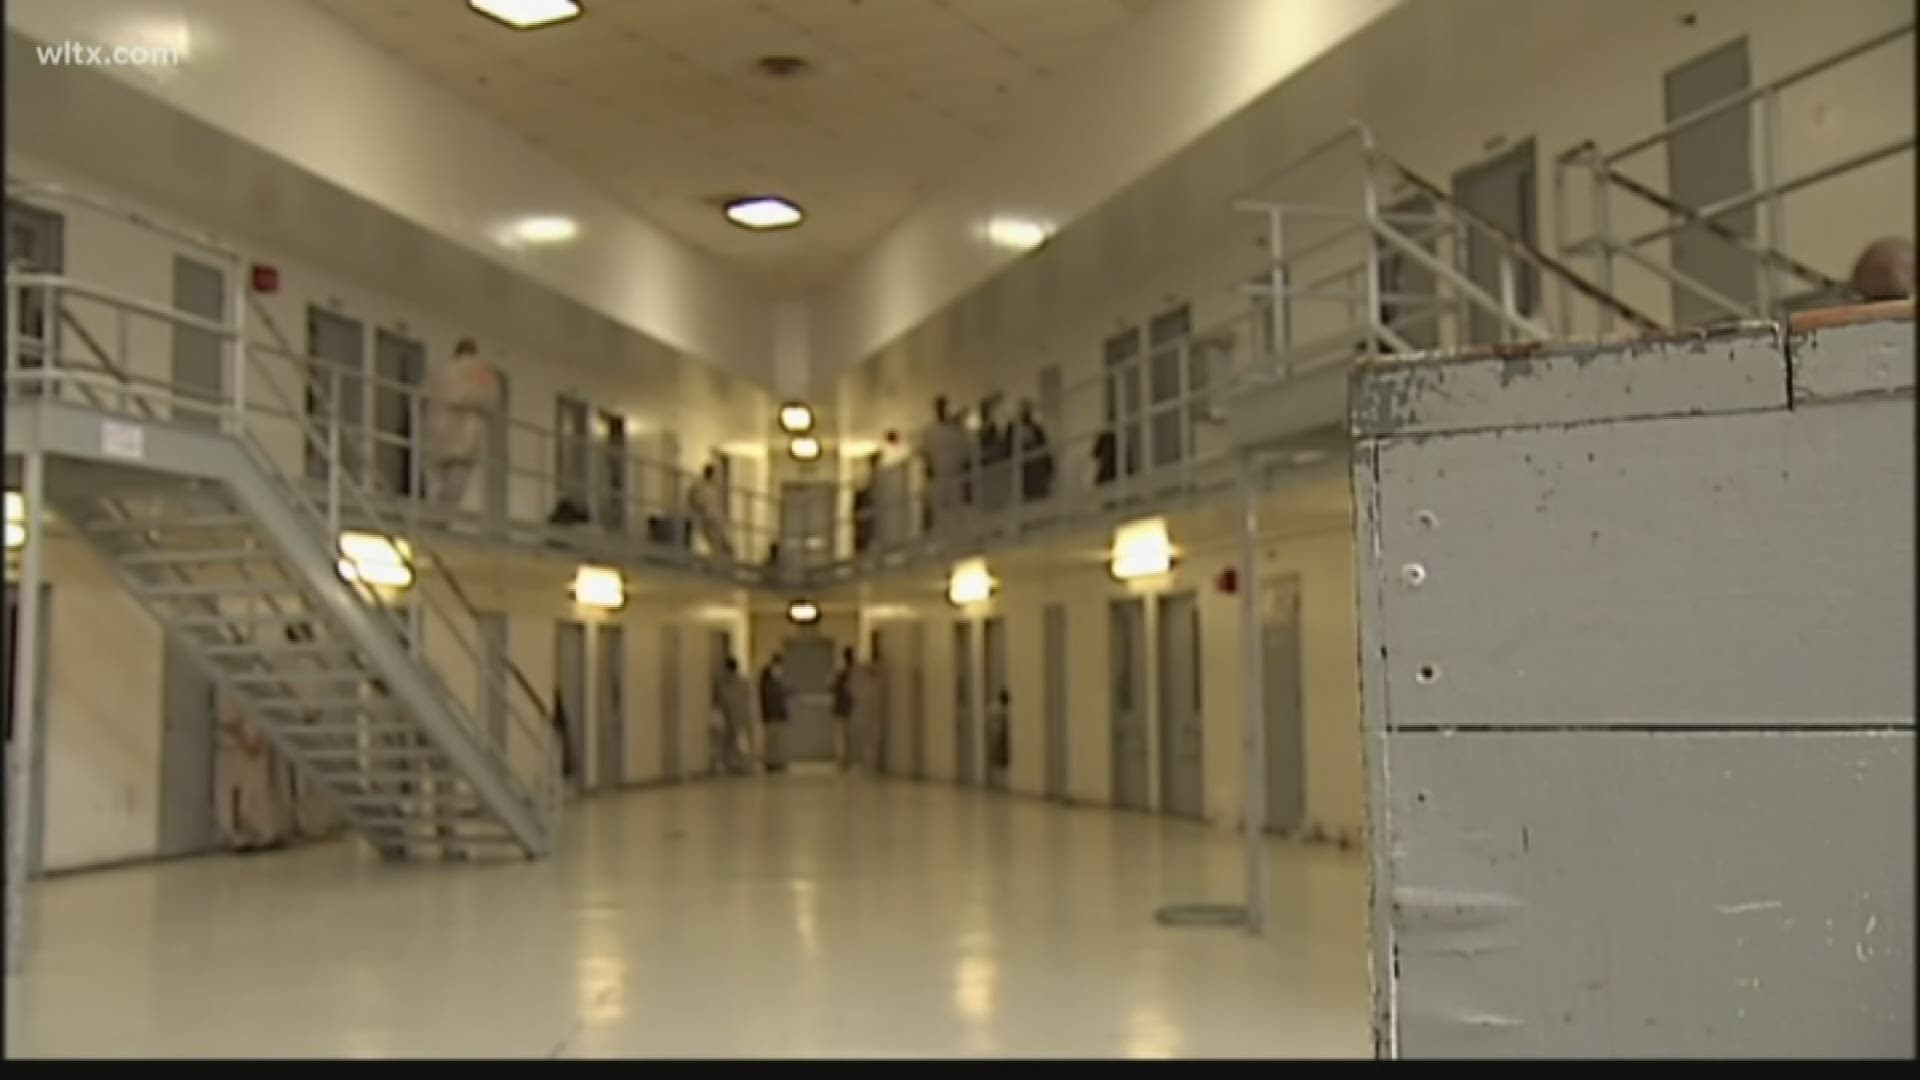 Visitation at all South Carolina prisons are suspended due to concerns about virus.